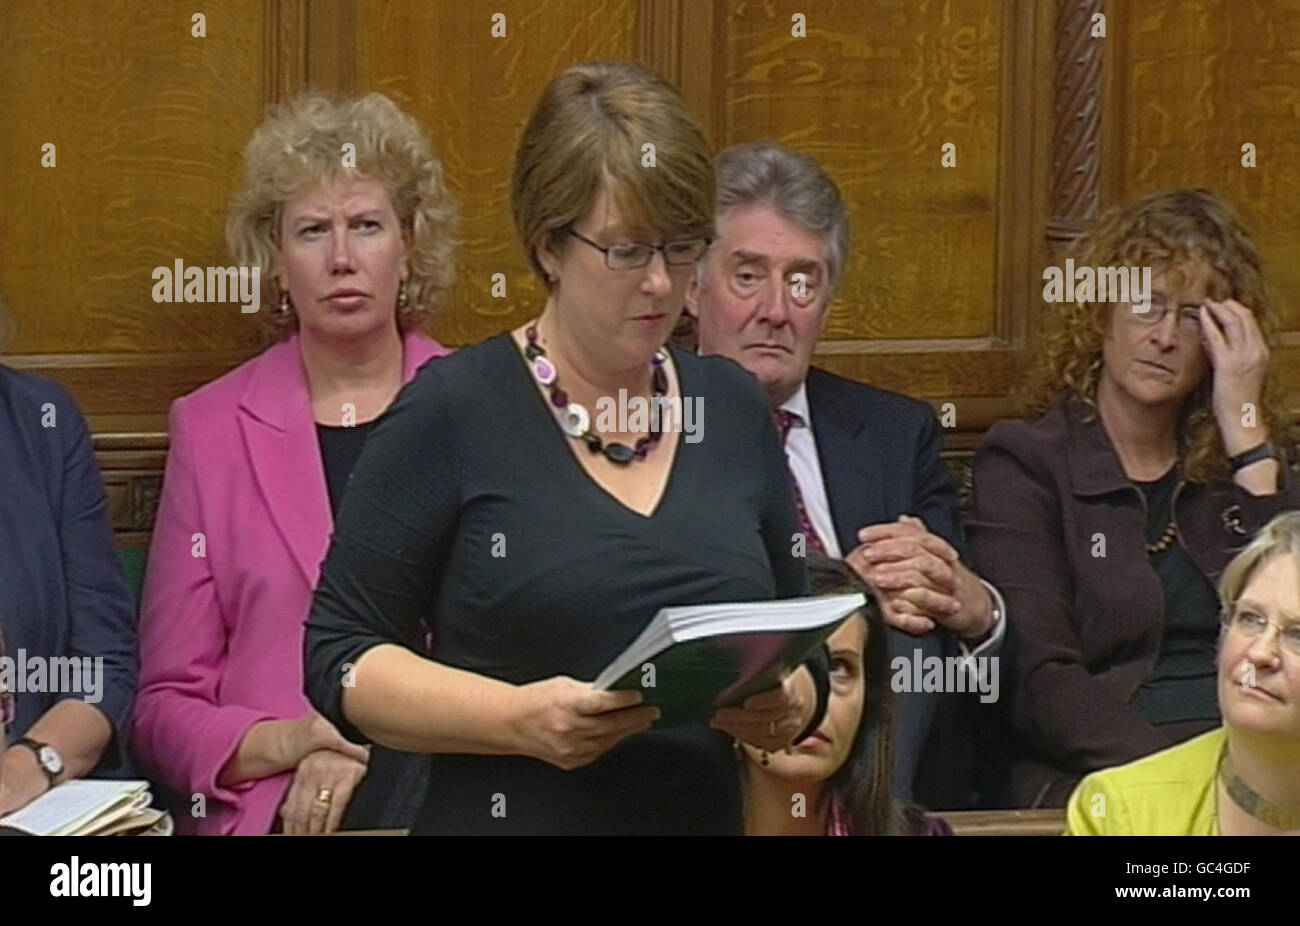 Former home secretary Jacqui Smith makes a public apology in the House of Commons after a watchdog found that she had 'clearly' breached rules on second home expenses. Stock Photo